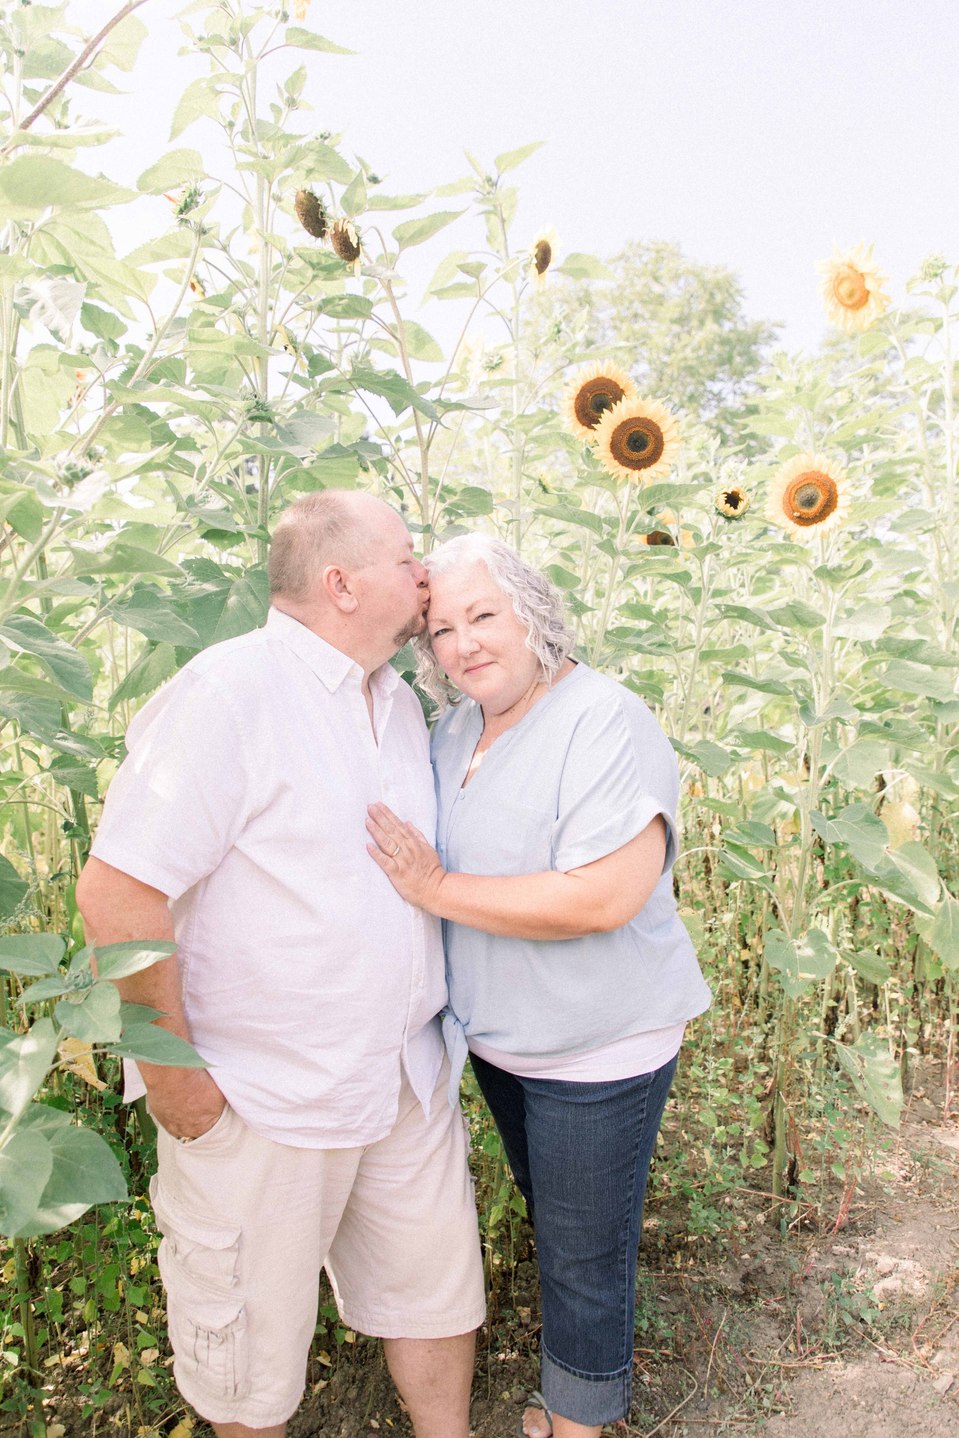 Portrait of couple hugging each other in a sunflower field, Niagara family photographer, family photography, Niagara portrait photographer, portrait photography, Emily VanderBeek Photography.